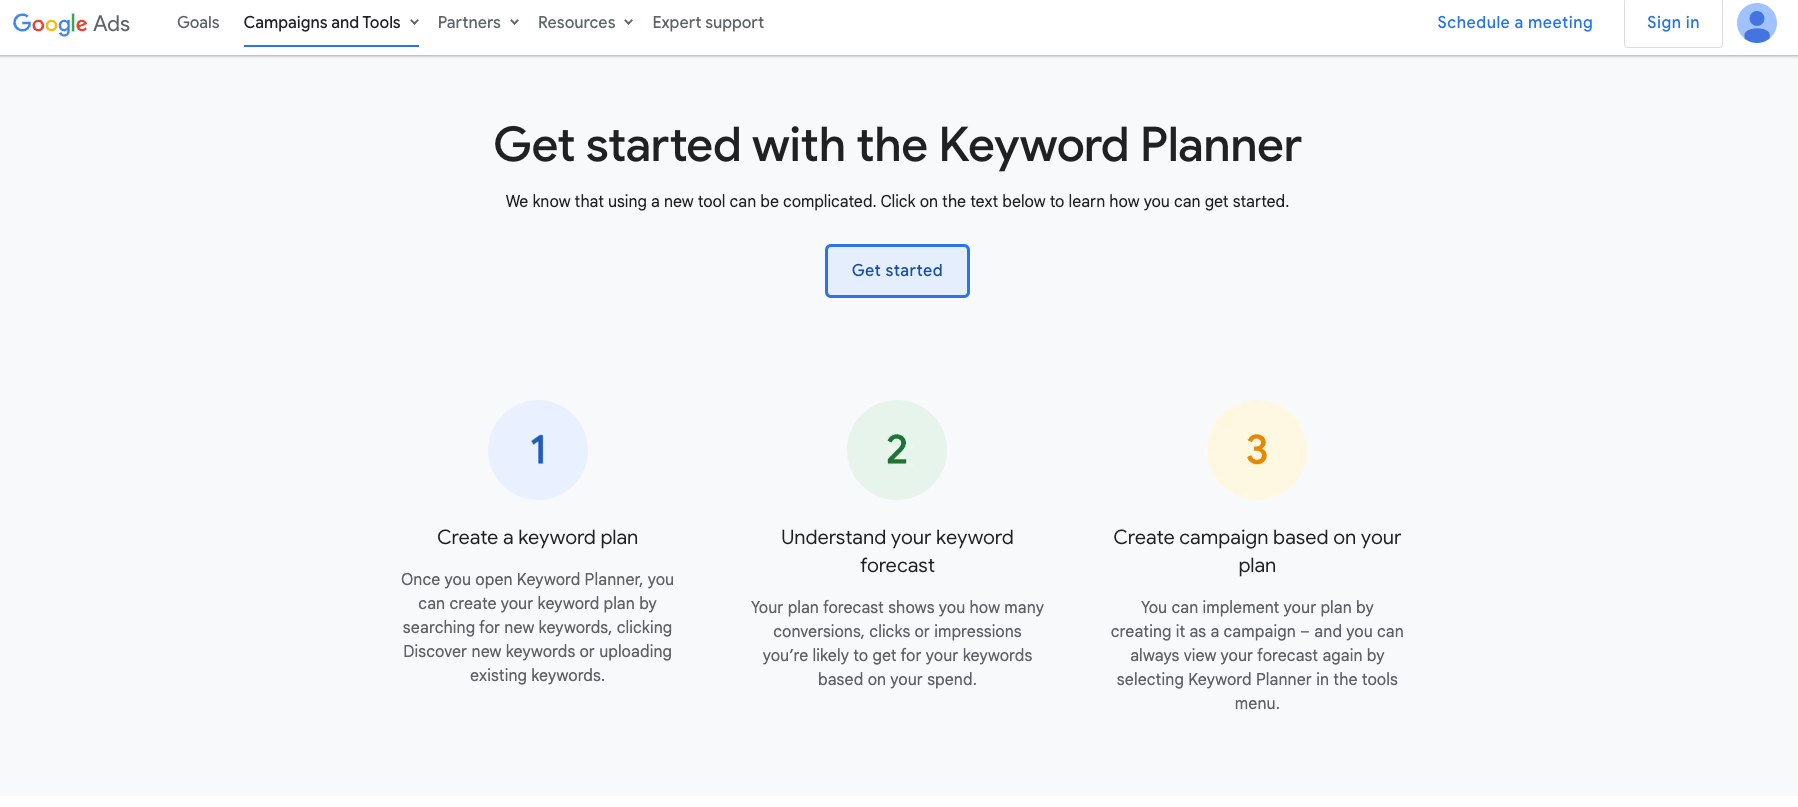 The image displays the opening webpage for Google Keyword Planner. The keyword planner helps you determine which keywords work best for your paid advertising with Google.